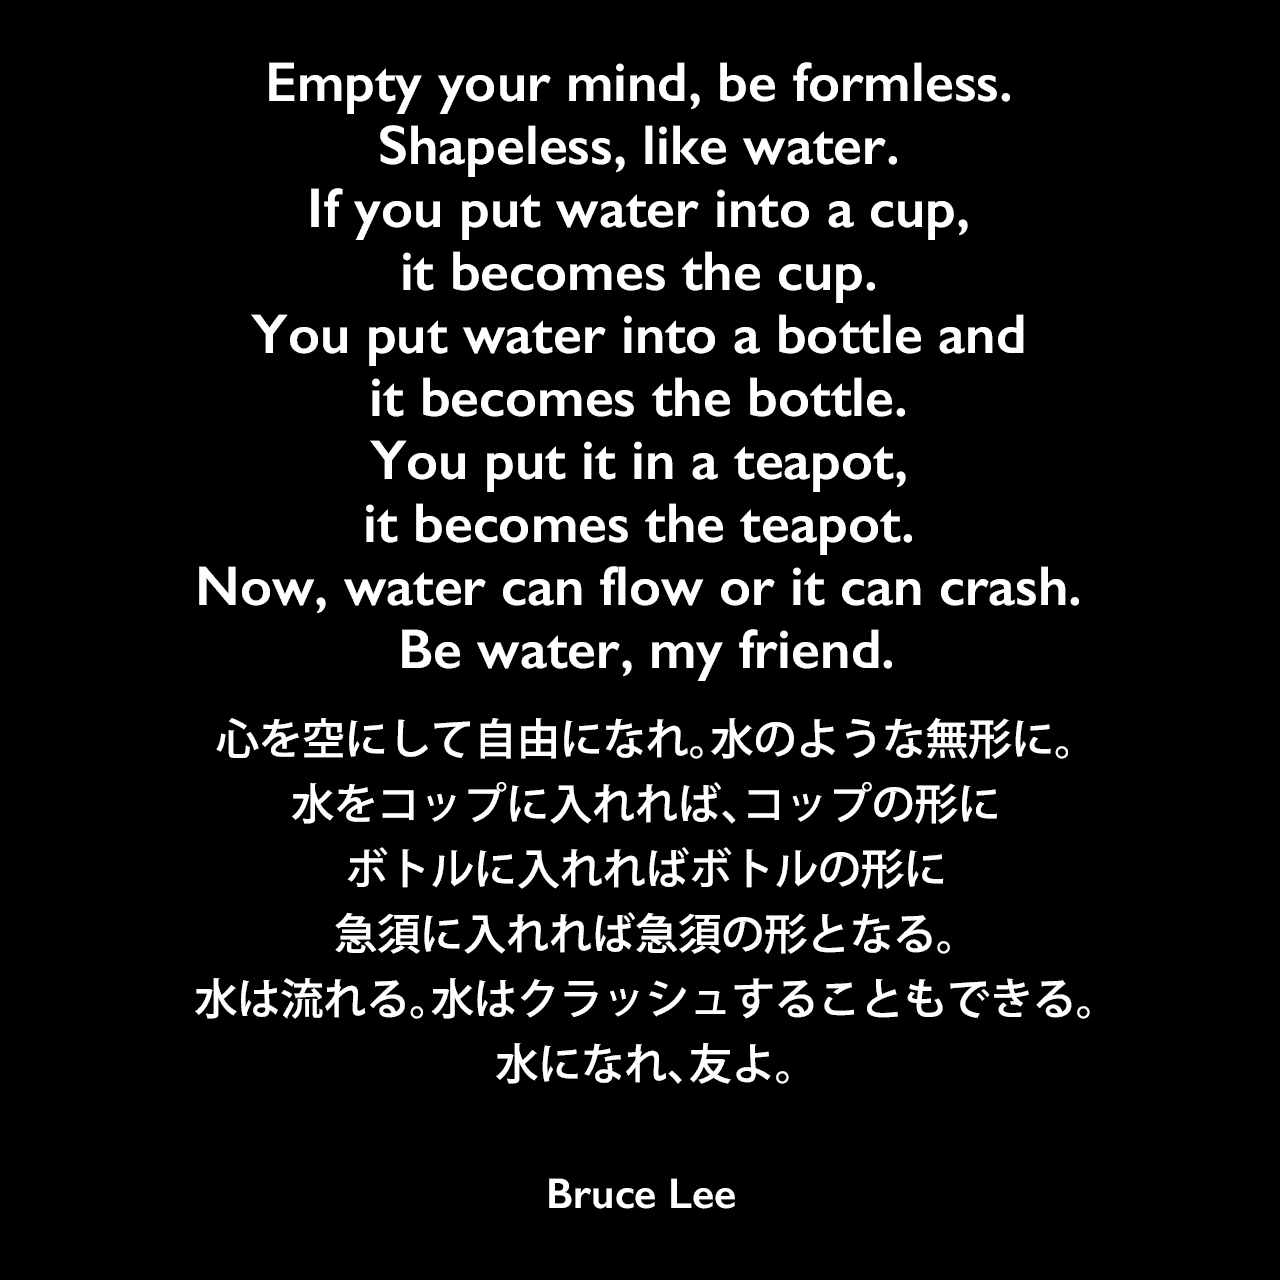 Empty your mind, be formless. Shapeless, like water. If you put water into a cup, it becomes the cup. You put water into a bottle and it becomes the bottle. You put it in a teapot, it becomes the teapot. Now, water can flow or it can crash. Be water, my friend.心を空にして自由になれ。水のような無形に。水をコップに入れれば、コップの形に、ボトルに入れればボトルの形に、急須に入れれば急須の形となる。水は流れる。水はクラッシュすることもできる。水になれ、友よ。- 映画「Bruce Lee: A Warrior's Journey」よりBruce Lee